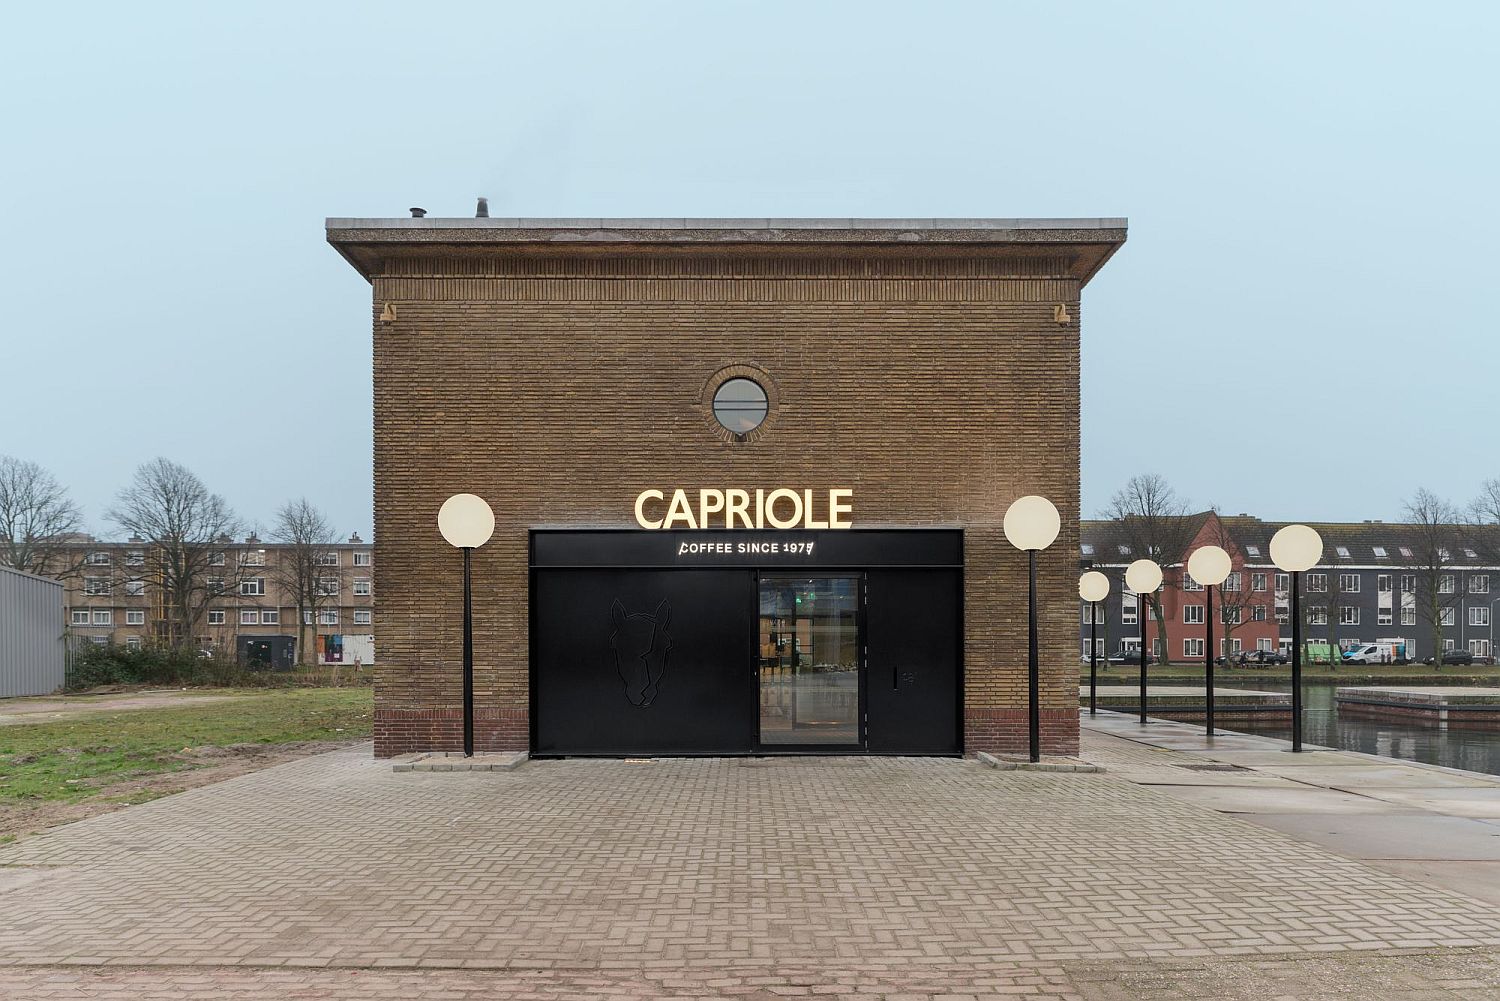 Capriole-Café-and-restaurant-in-The-Hague